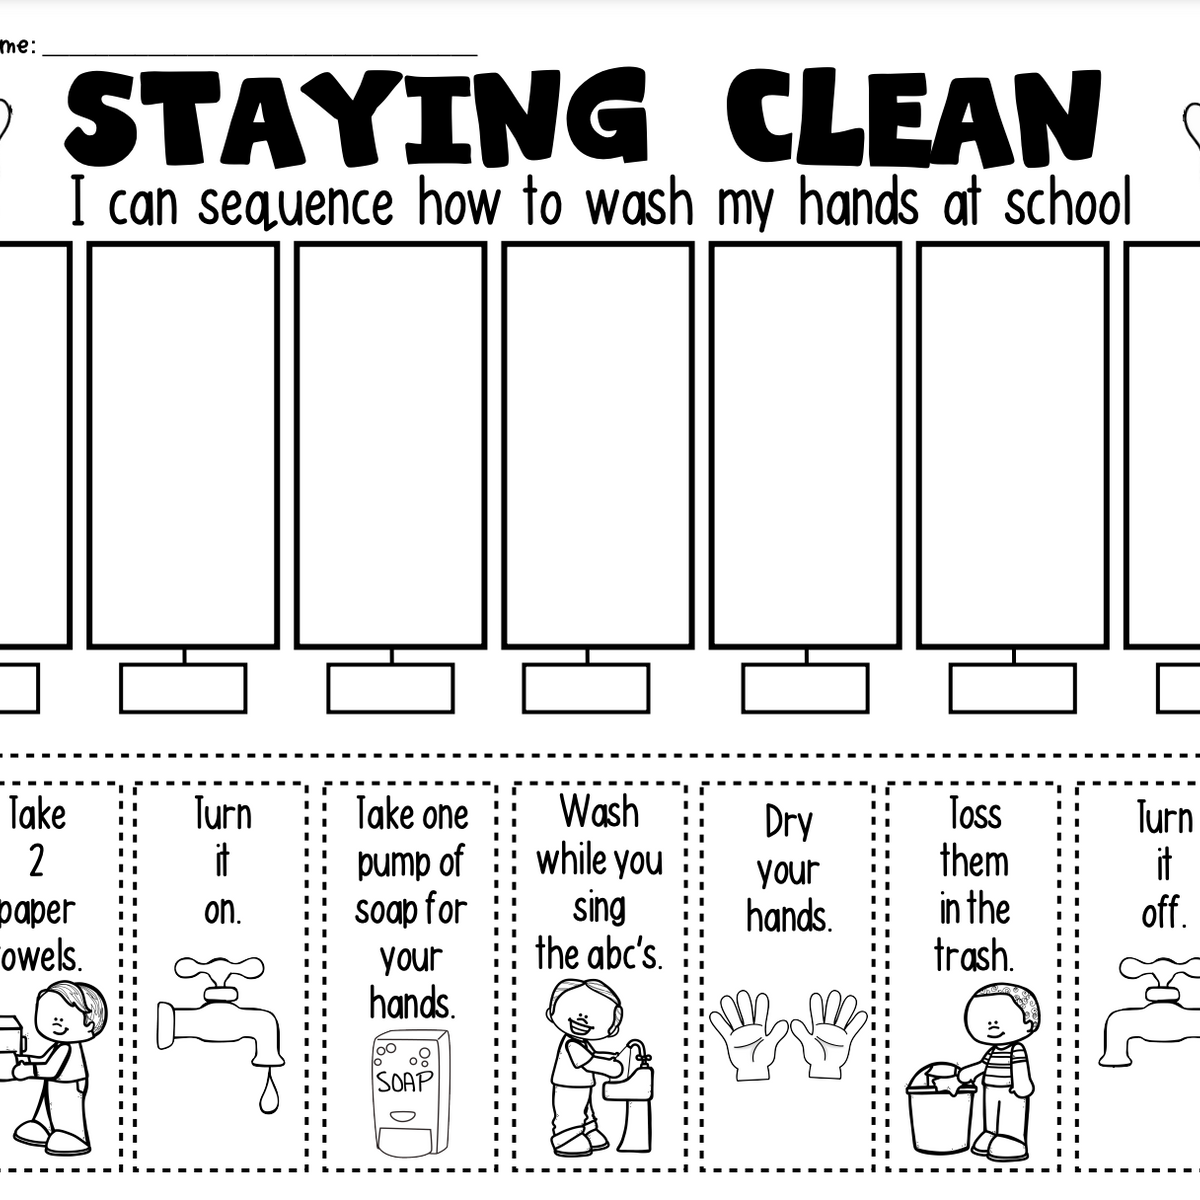 How To Wash Your Hands Teaching Procedures & Expectations Sequence Activity